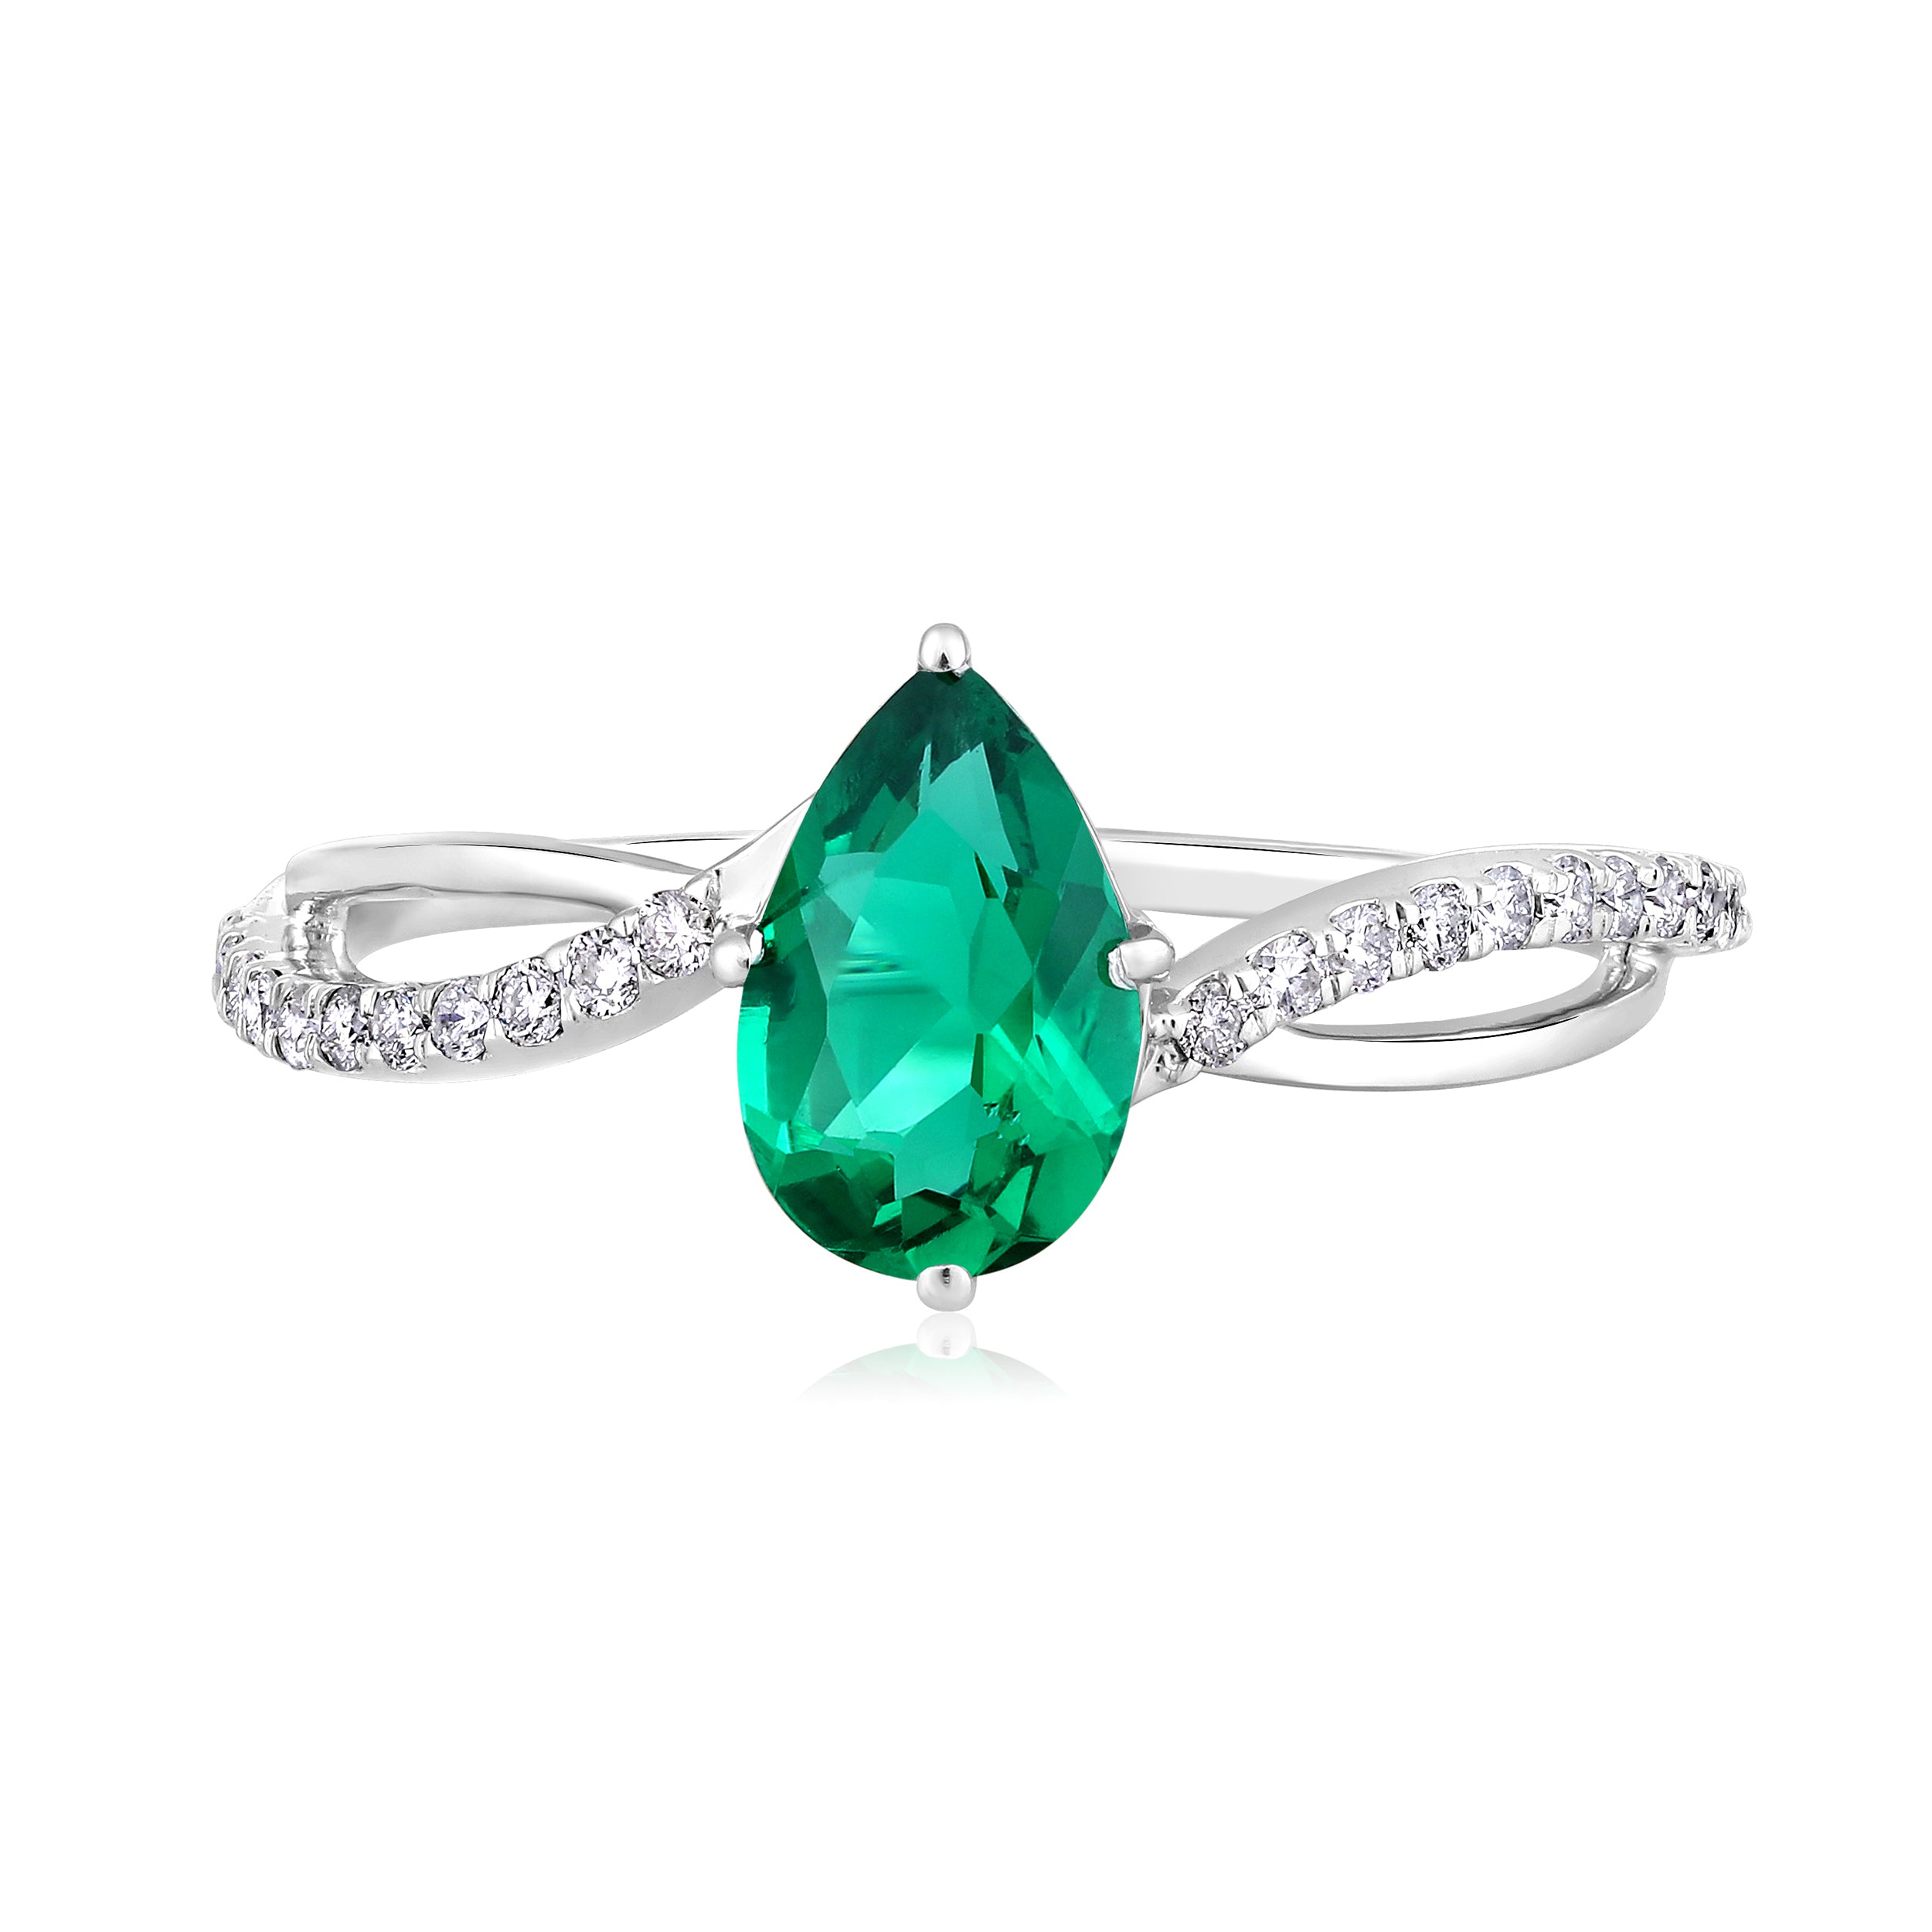 Certified 10K Gold 1ct Natural Diamond w/ Simulated Emerald Pear Twist White Ring